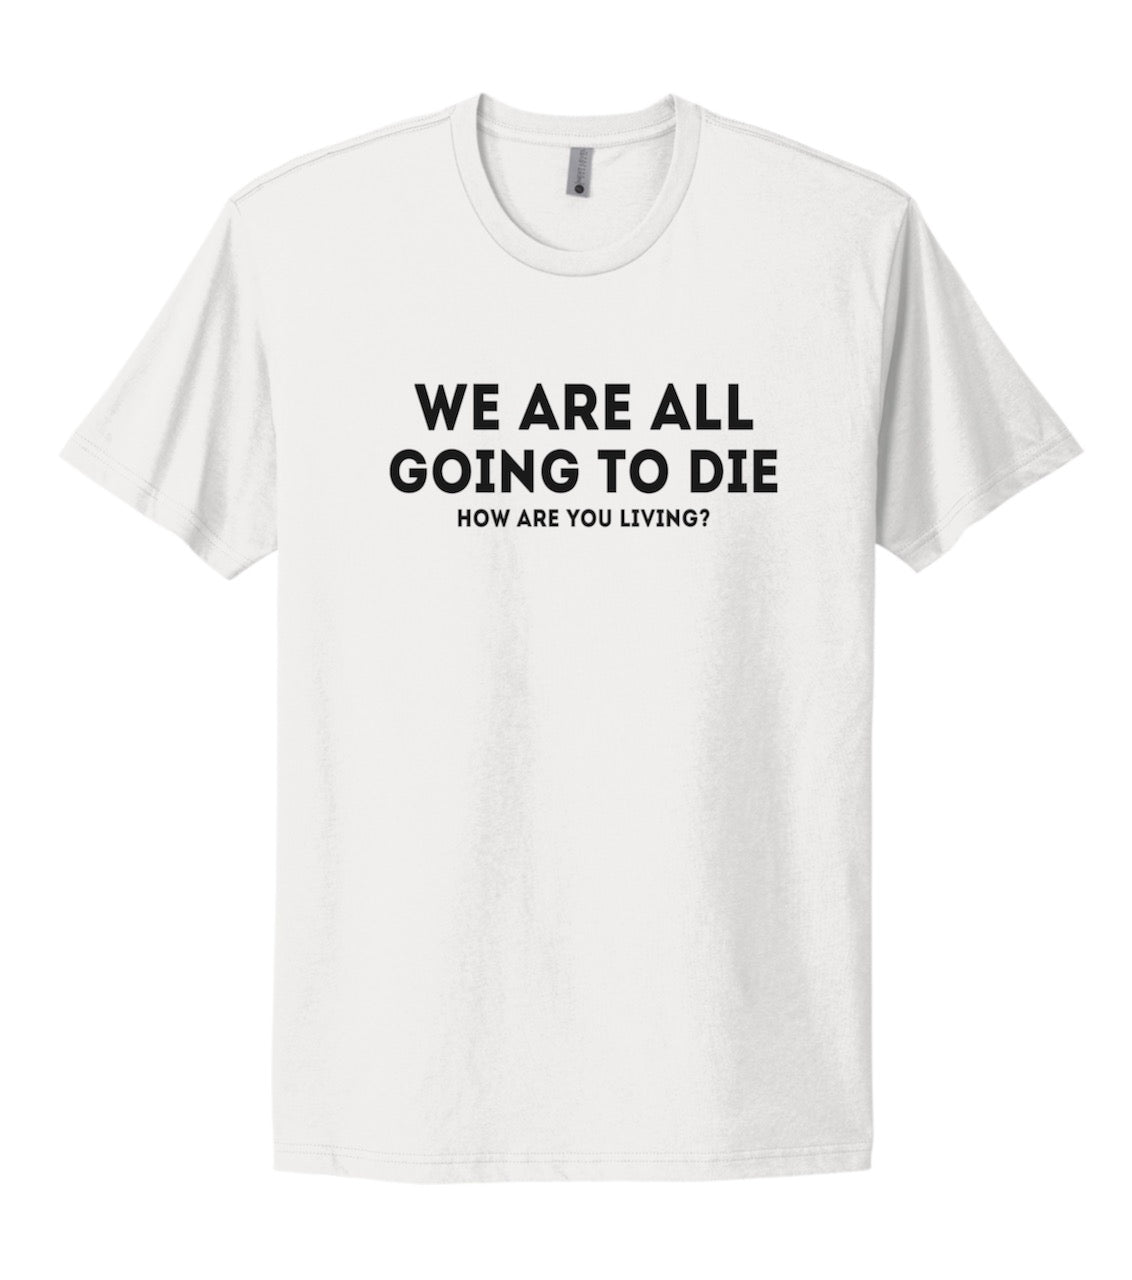 WE ARE ALL GOING TO DIE t-shirt